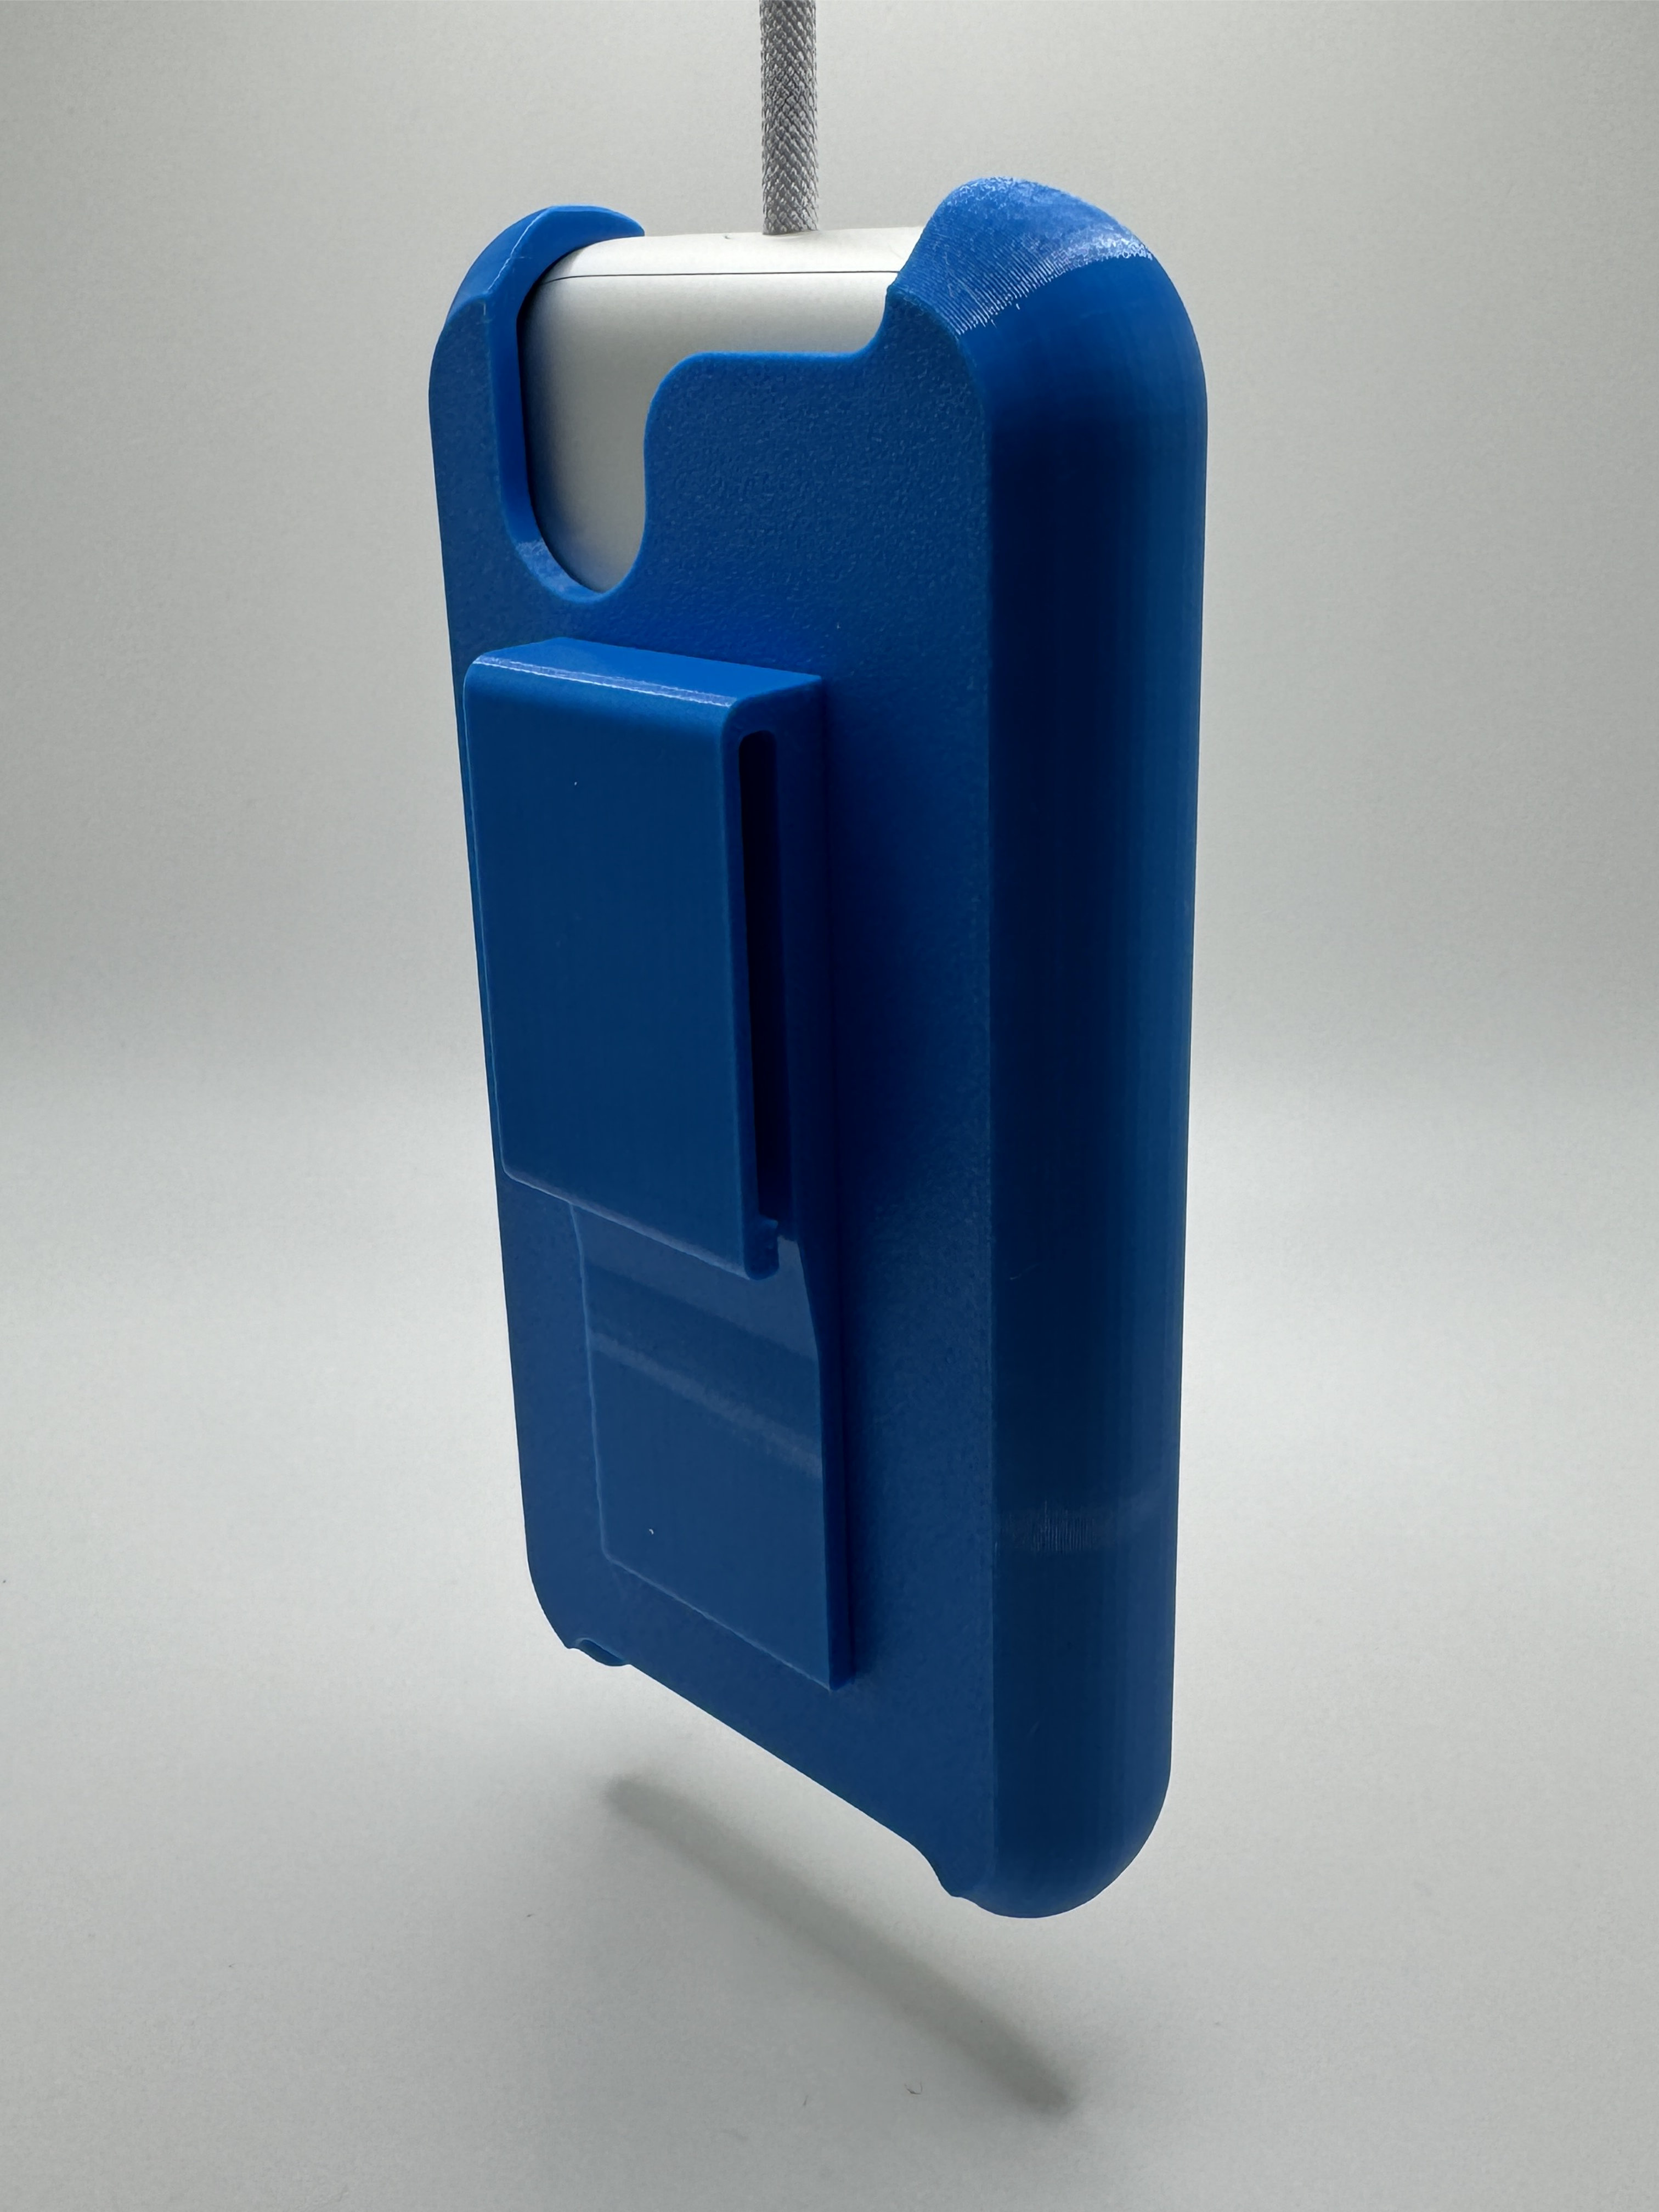 A picture of the holder in Blue